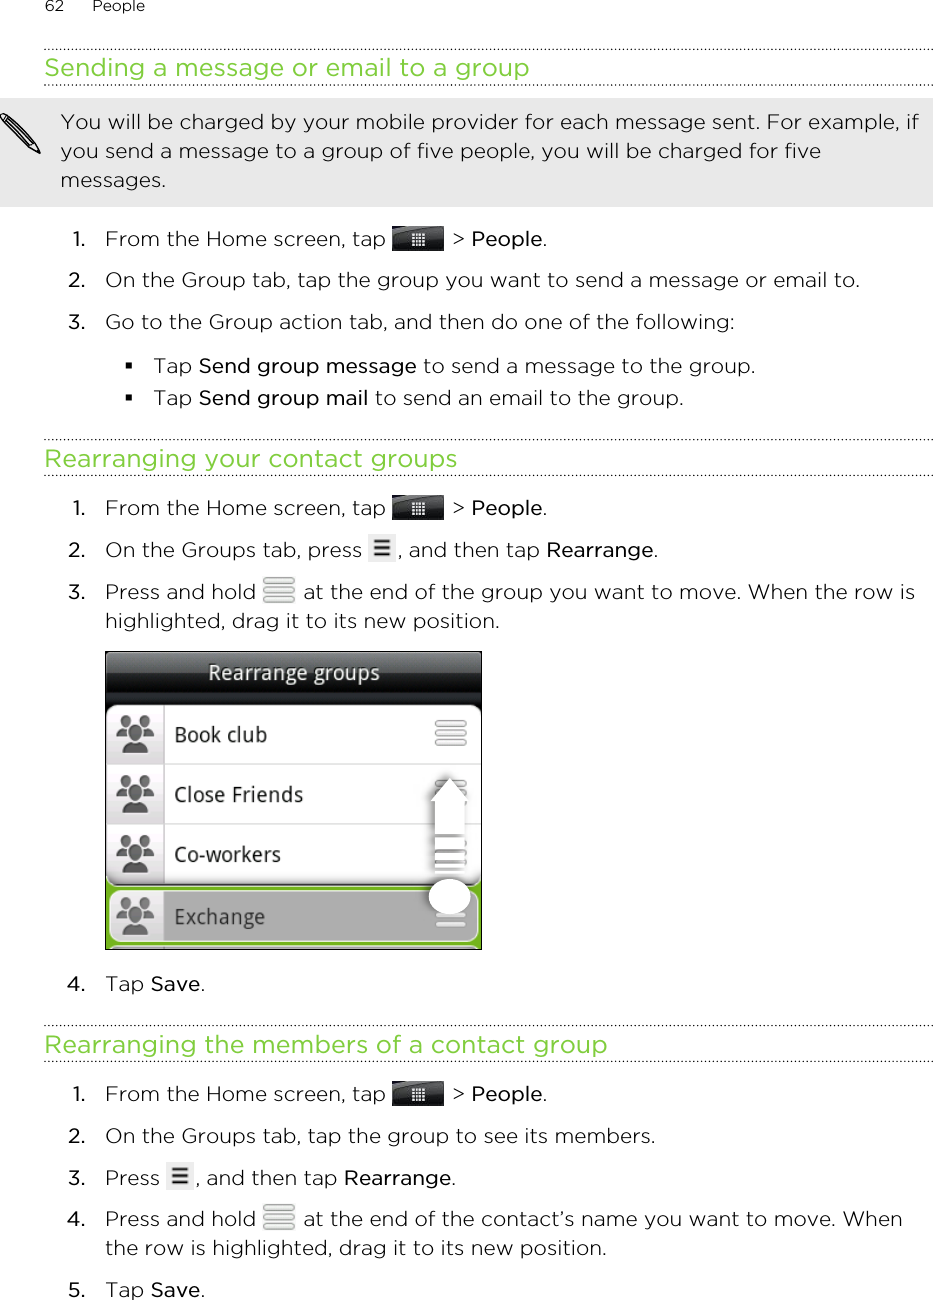 Sending a message or email to a groupYou will be charged by your mobile provider for each message sent. For example, ifyou send a message to a group of five people, you will be charged for fivemessages.1. From the Home screen, tap   &gt; People.2. On the Group tab, tap the group you want to send a message or email to.3. Go to the Group action tab, and then do one of the following:§Tap Send group message to send a message to the group.§Tap Send group mail to send an email to the group.Rearranging your contact groups1. From the Home screen, tap   &gt; People.2. On the Groups tab, press  , and then tap Rearrange.3. Press and hold   at the end of the group you want to move. When the row ishighlighted, drag it to its new position. 4. Tap Save.Rearranging the members of a contact group1. From the Home screen, tap   &gt; People.2. On the Groups tab, tap the group to see its members.3. Press  , and then tap Rearrange.4. Press and hold   at the end of the contact’s name you want to move. Whenthe row is highlighted, drag it to its new position.5. Tap Save.62 People